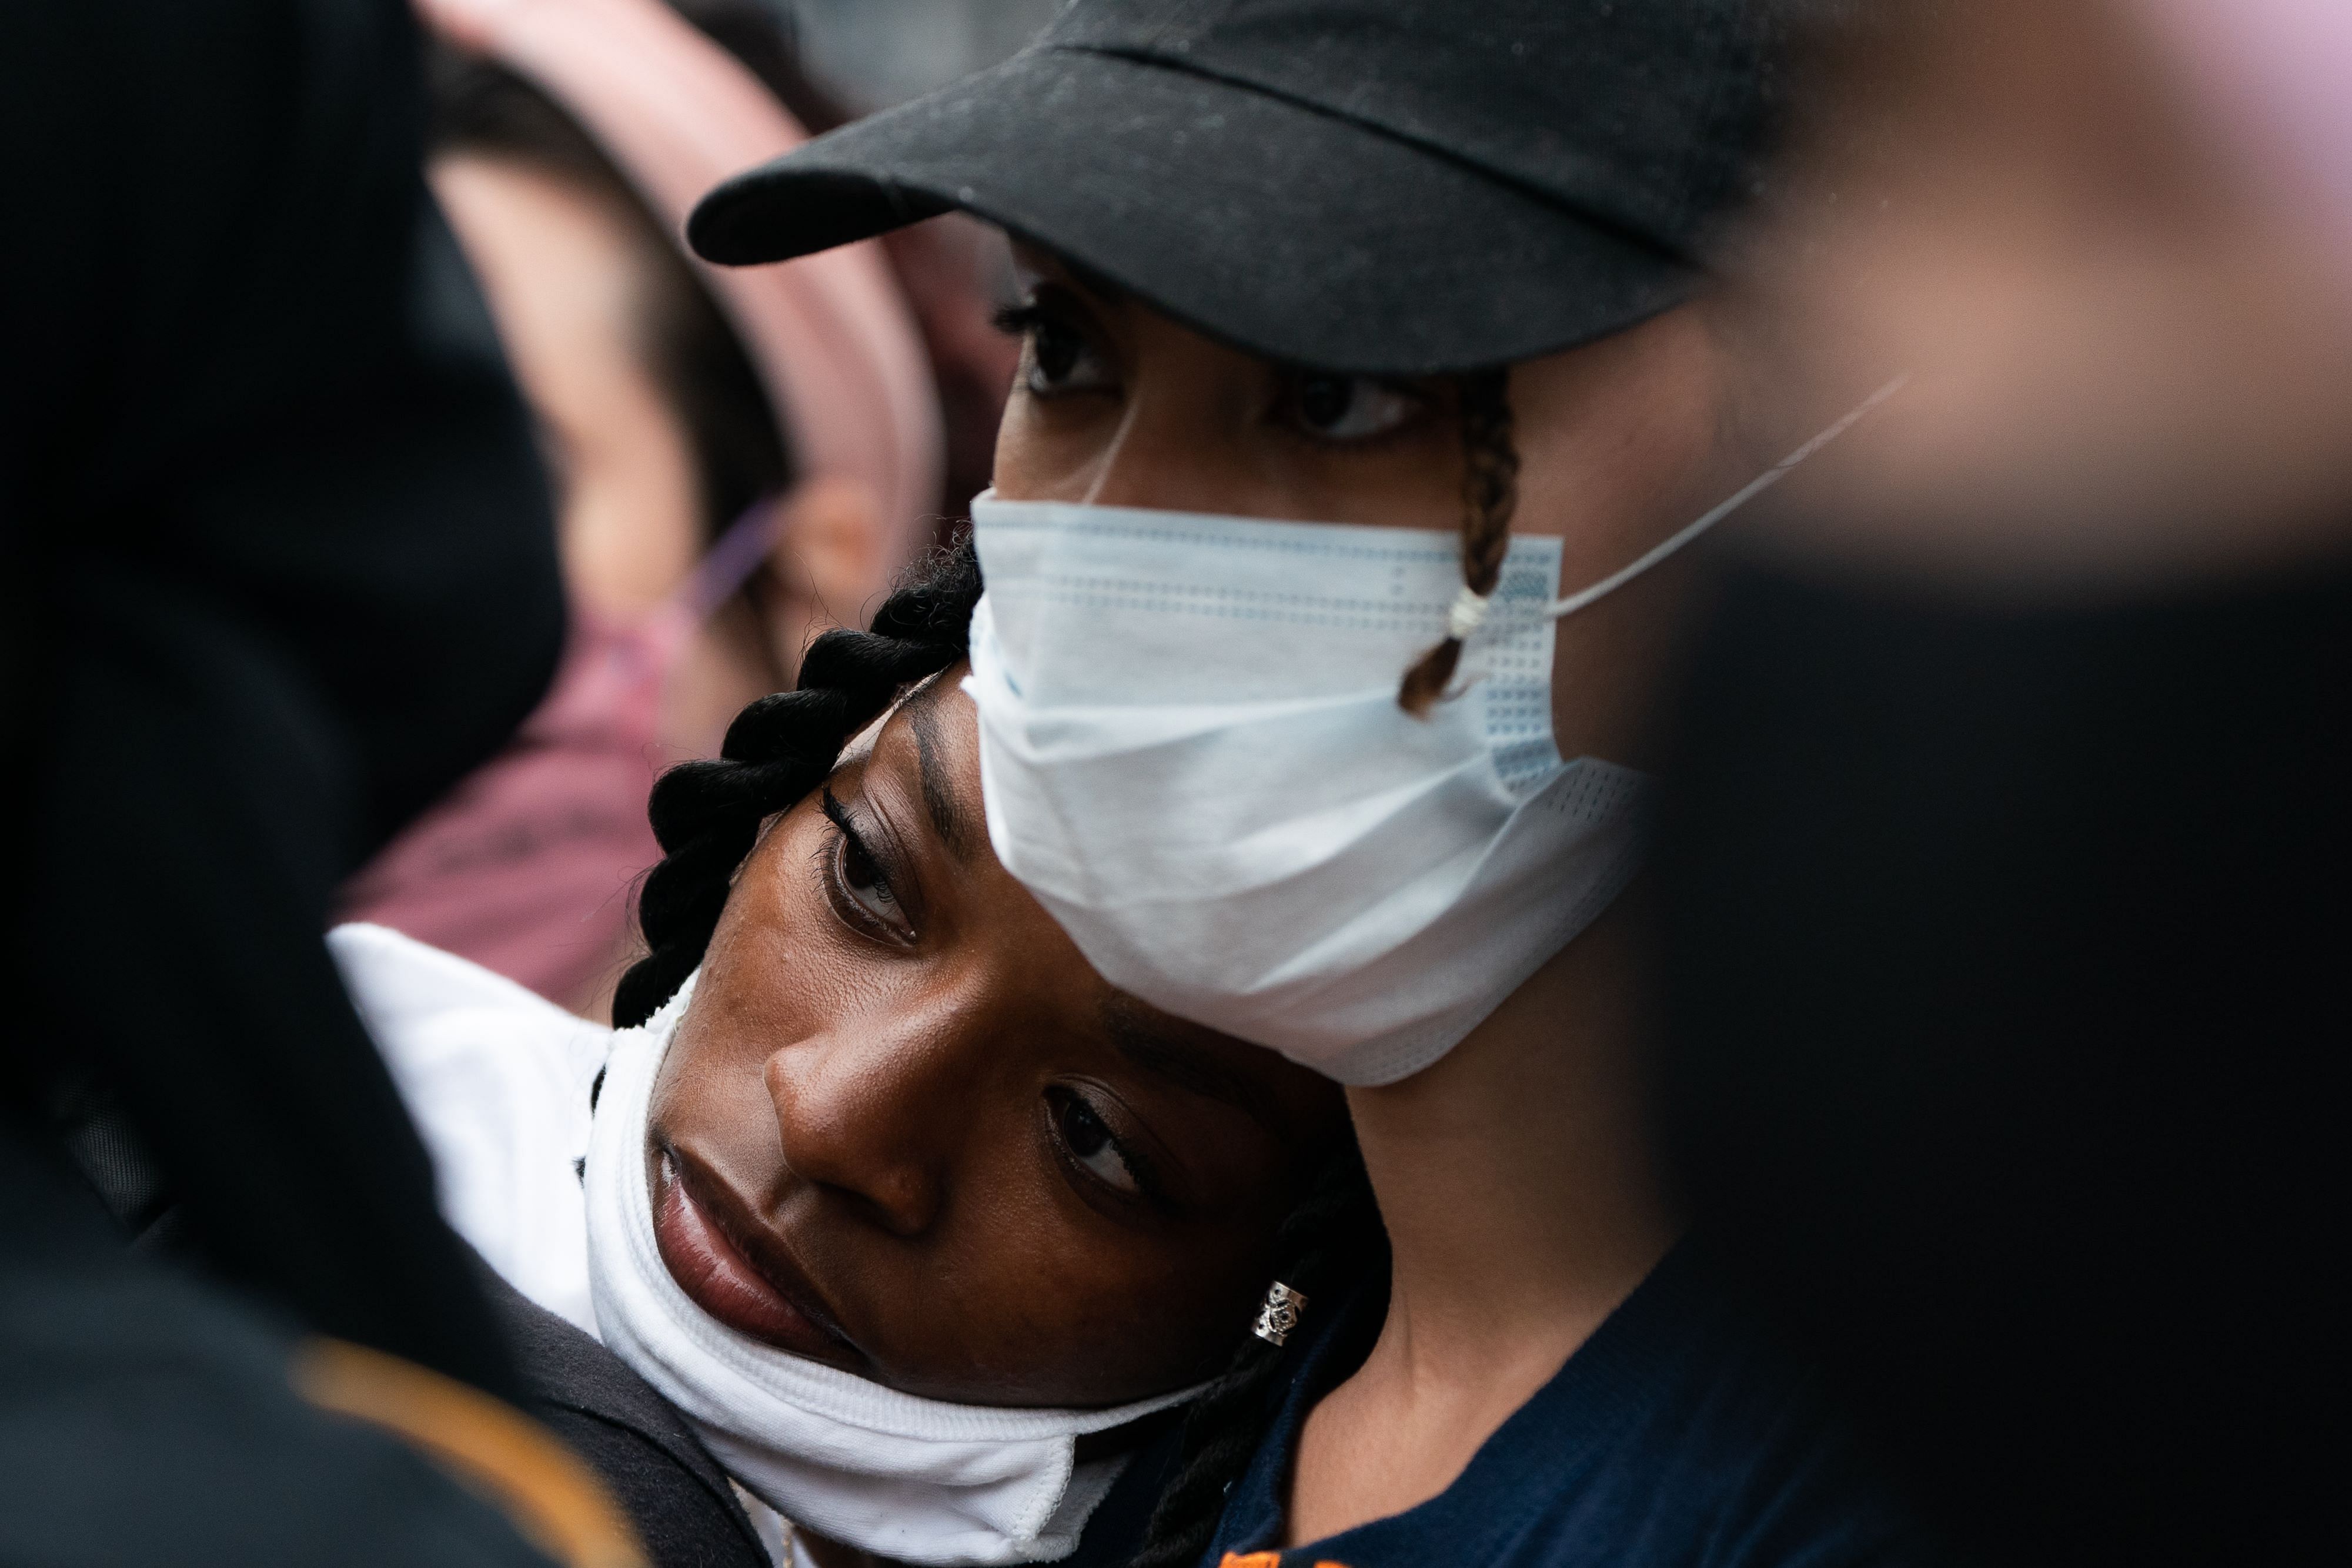 Protesters participate during a Black Lives Matter protest on June 17, 2020 in the Manhattan borough of New York City. Credit: AFP Photo